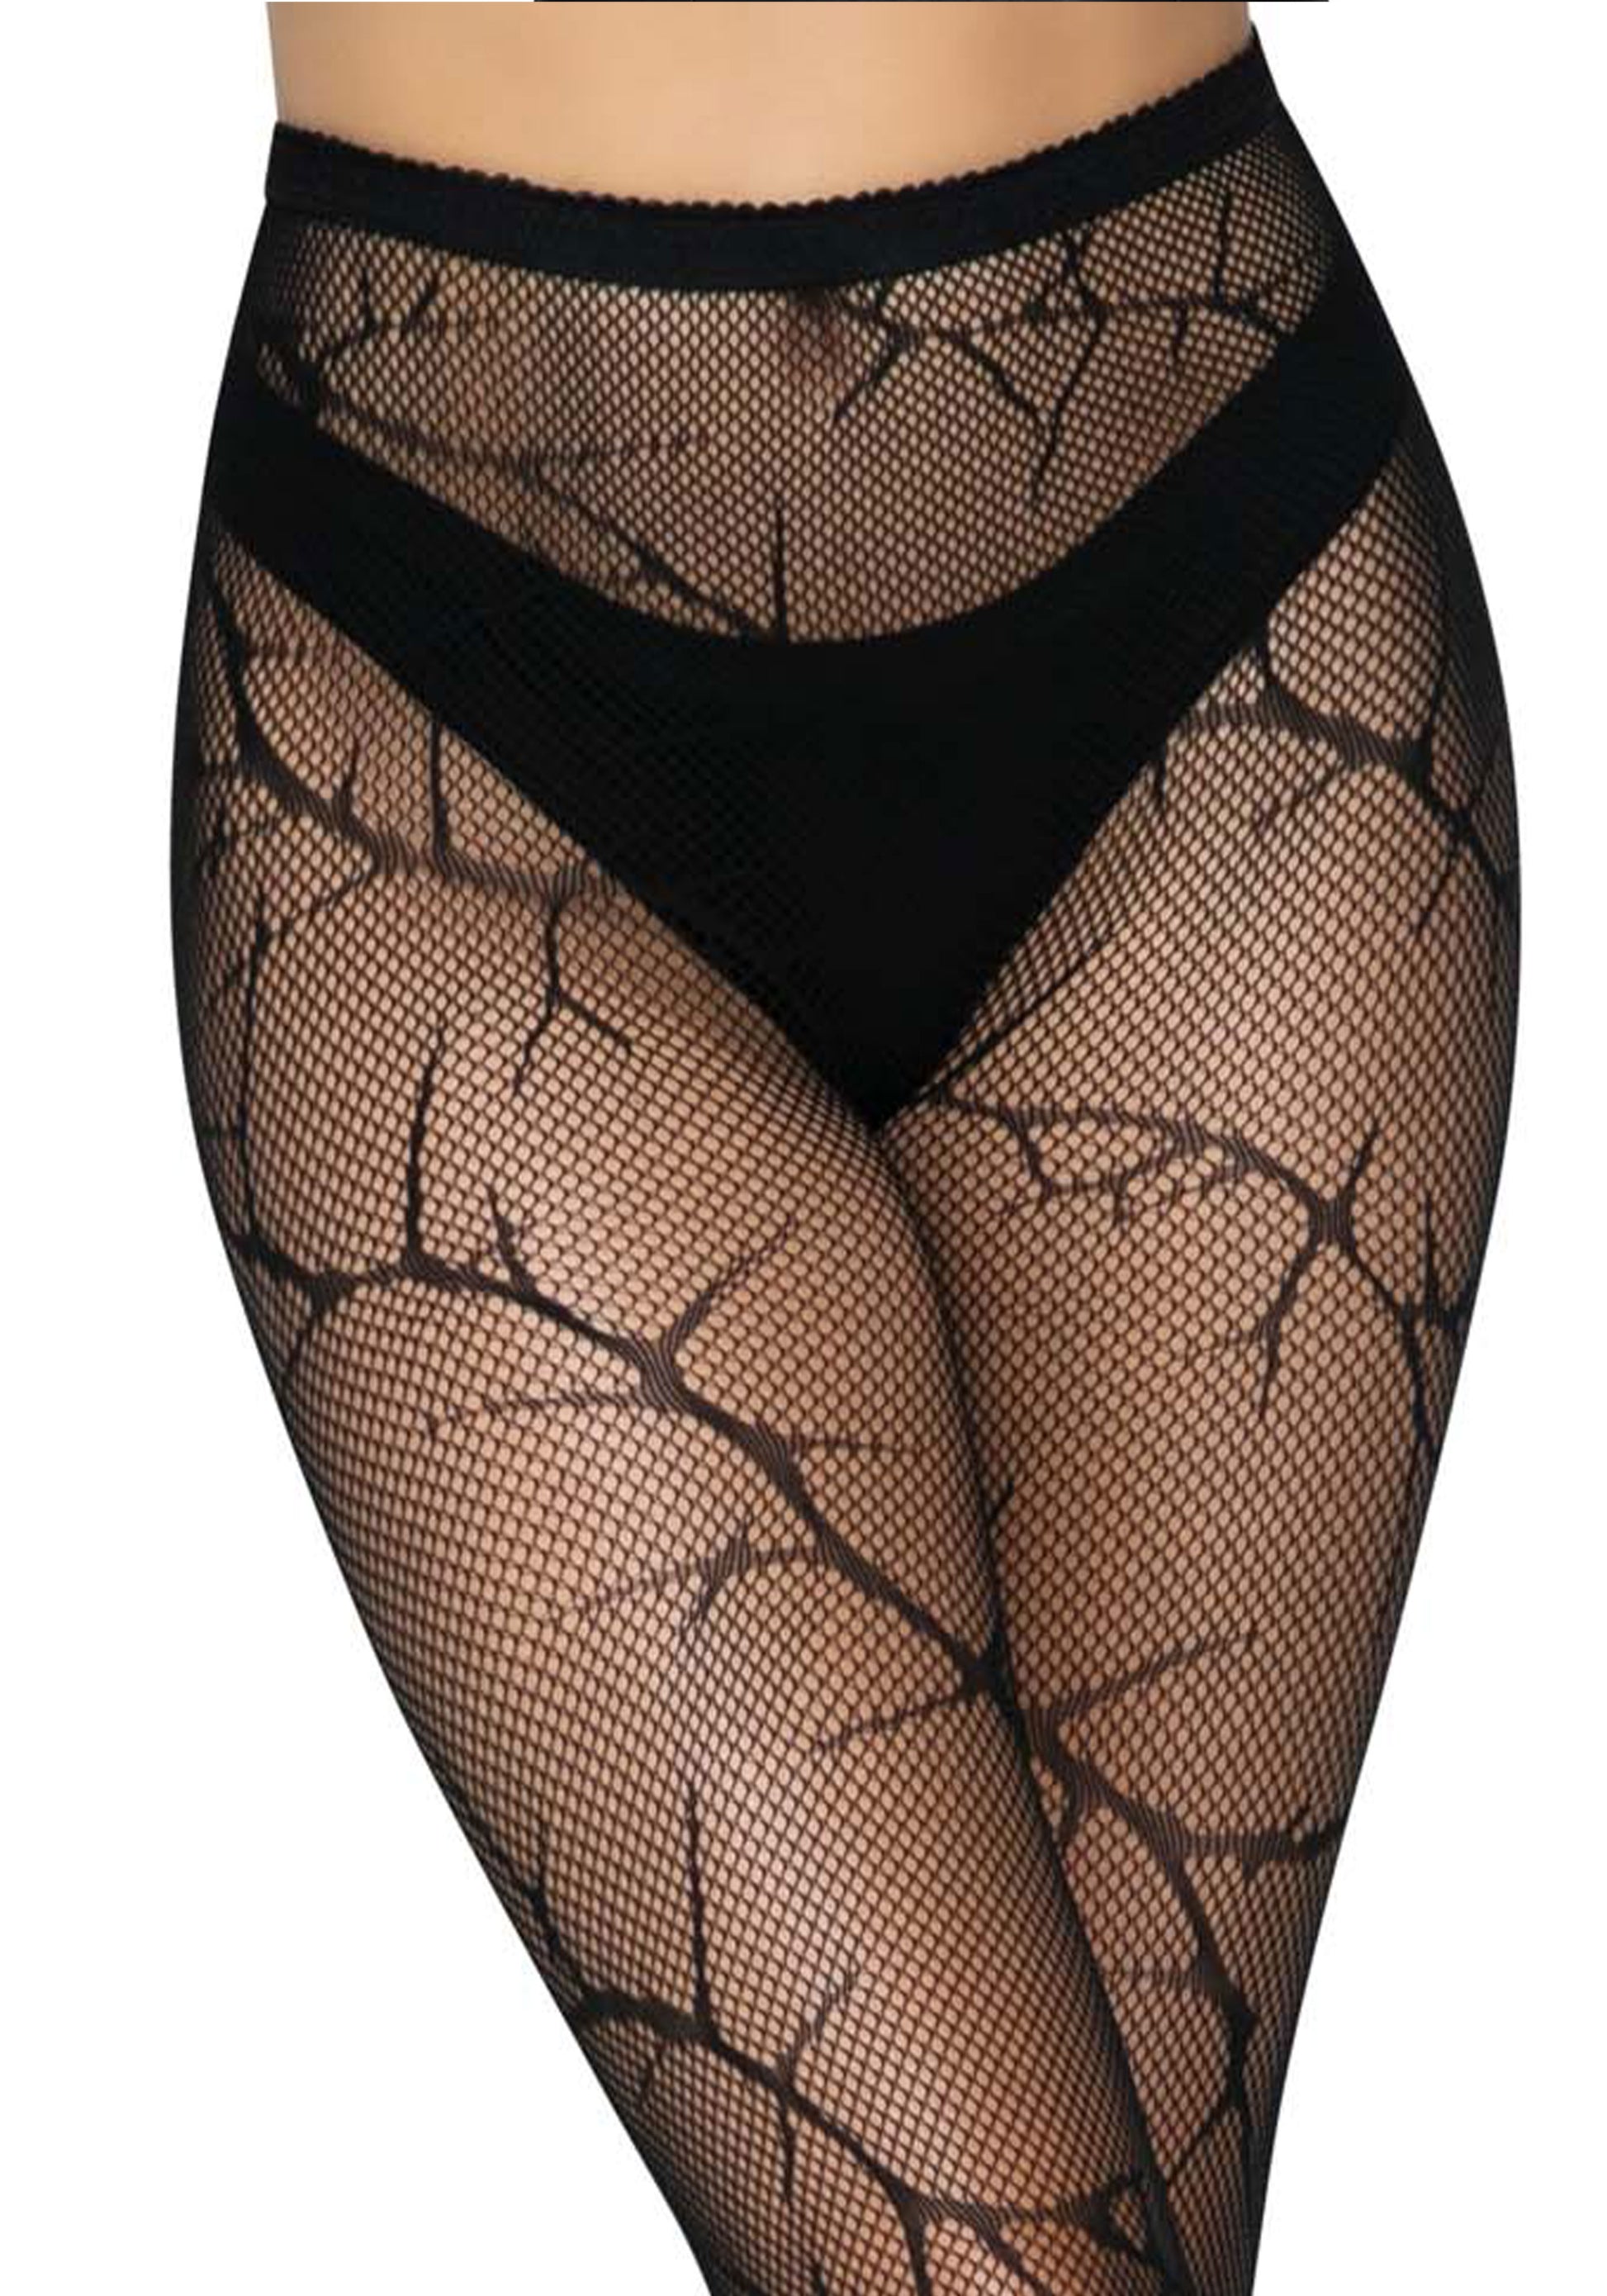 Leg Avenue 9724 Cracked Fishnet Tights Detail - Black openwork fishnet tights with a broken crackled crack style pattern.